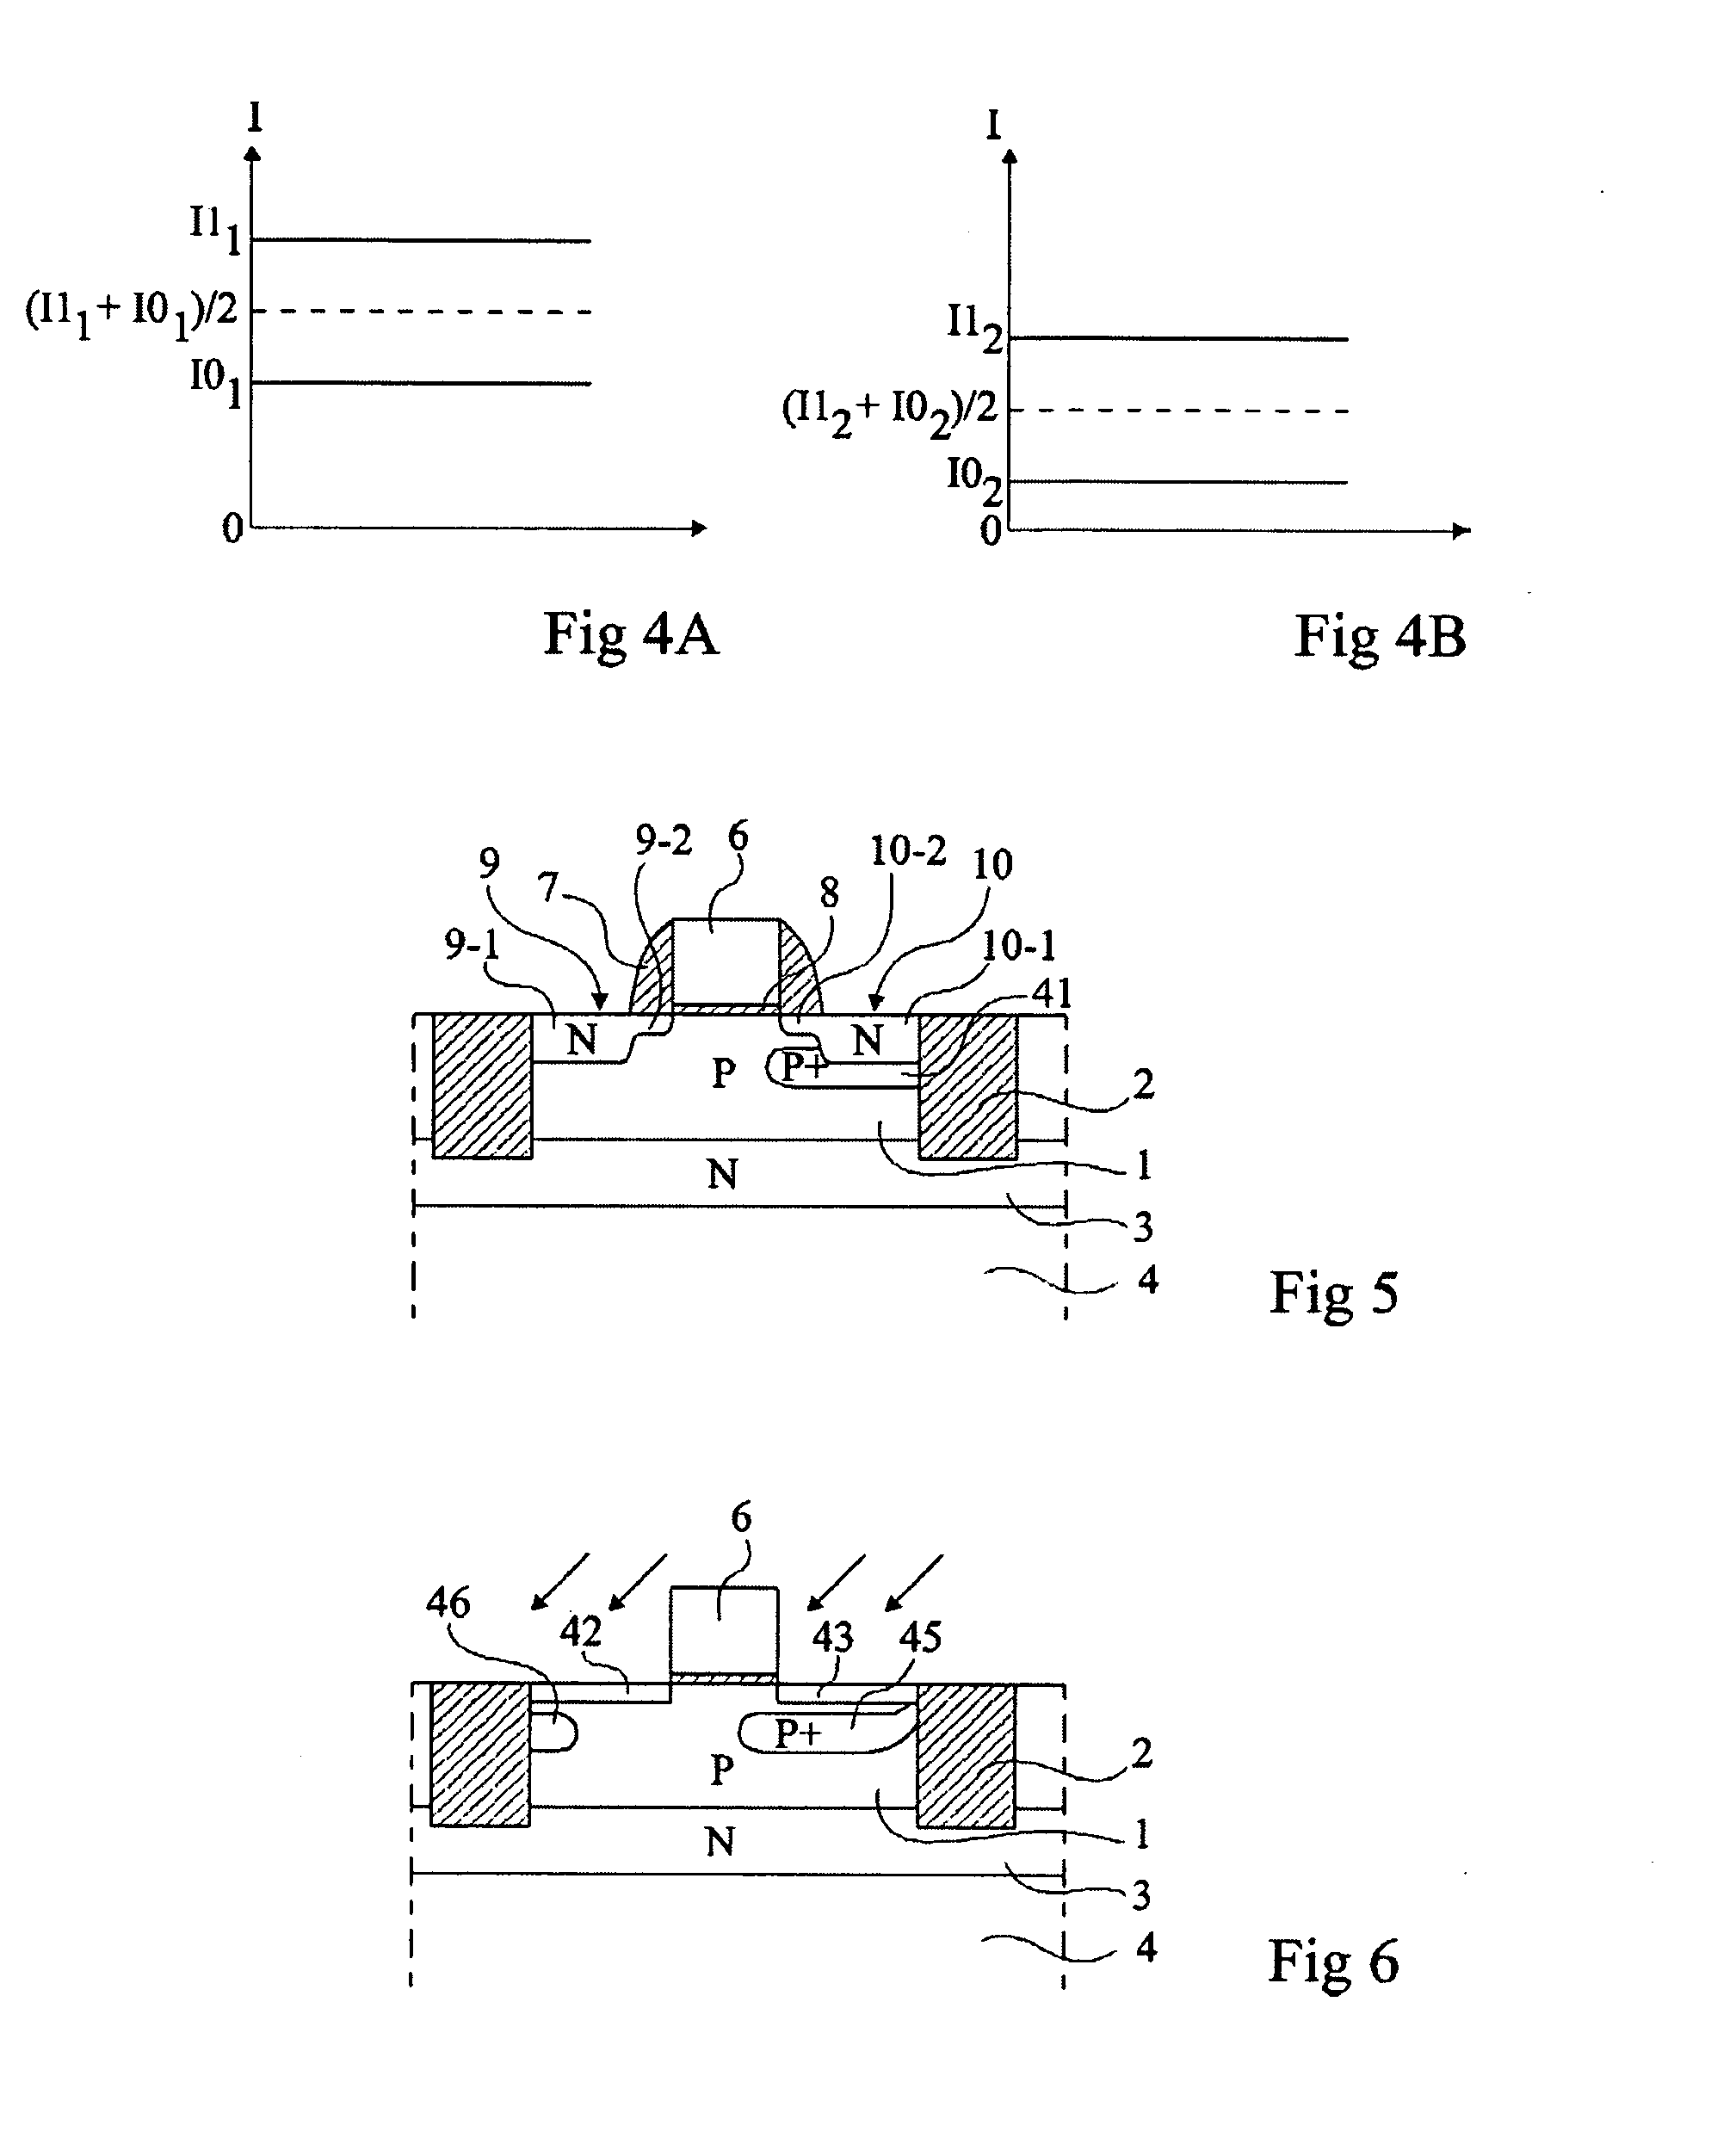 Memory cell comprising one MOS transistor with an isolated body having an improved read sensitivity